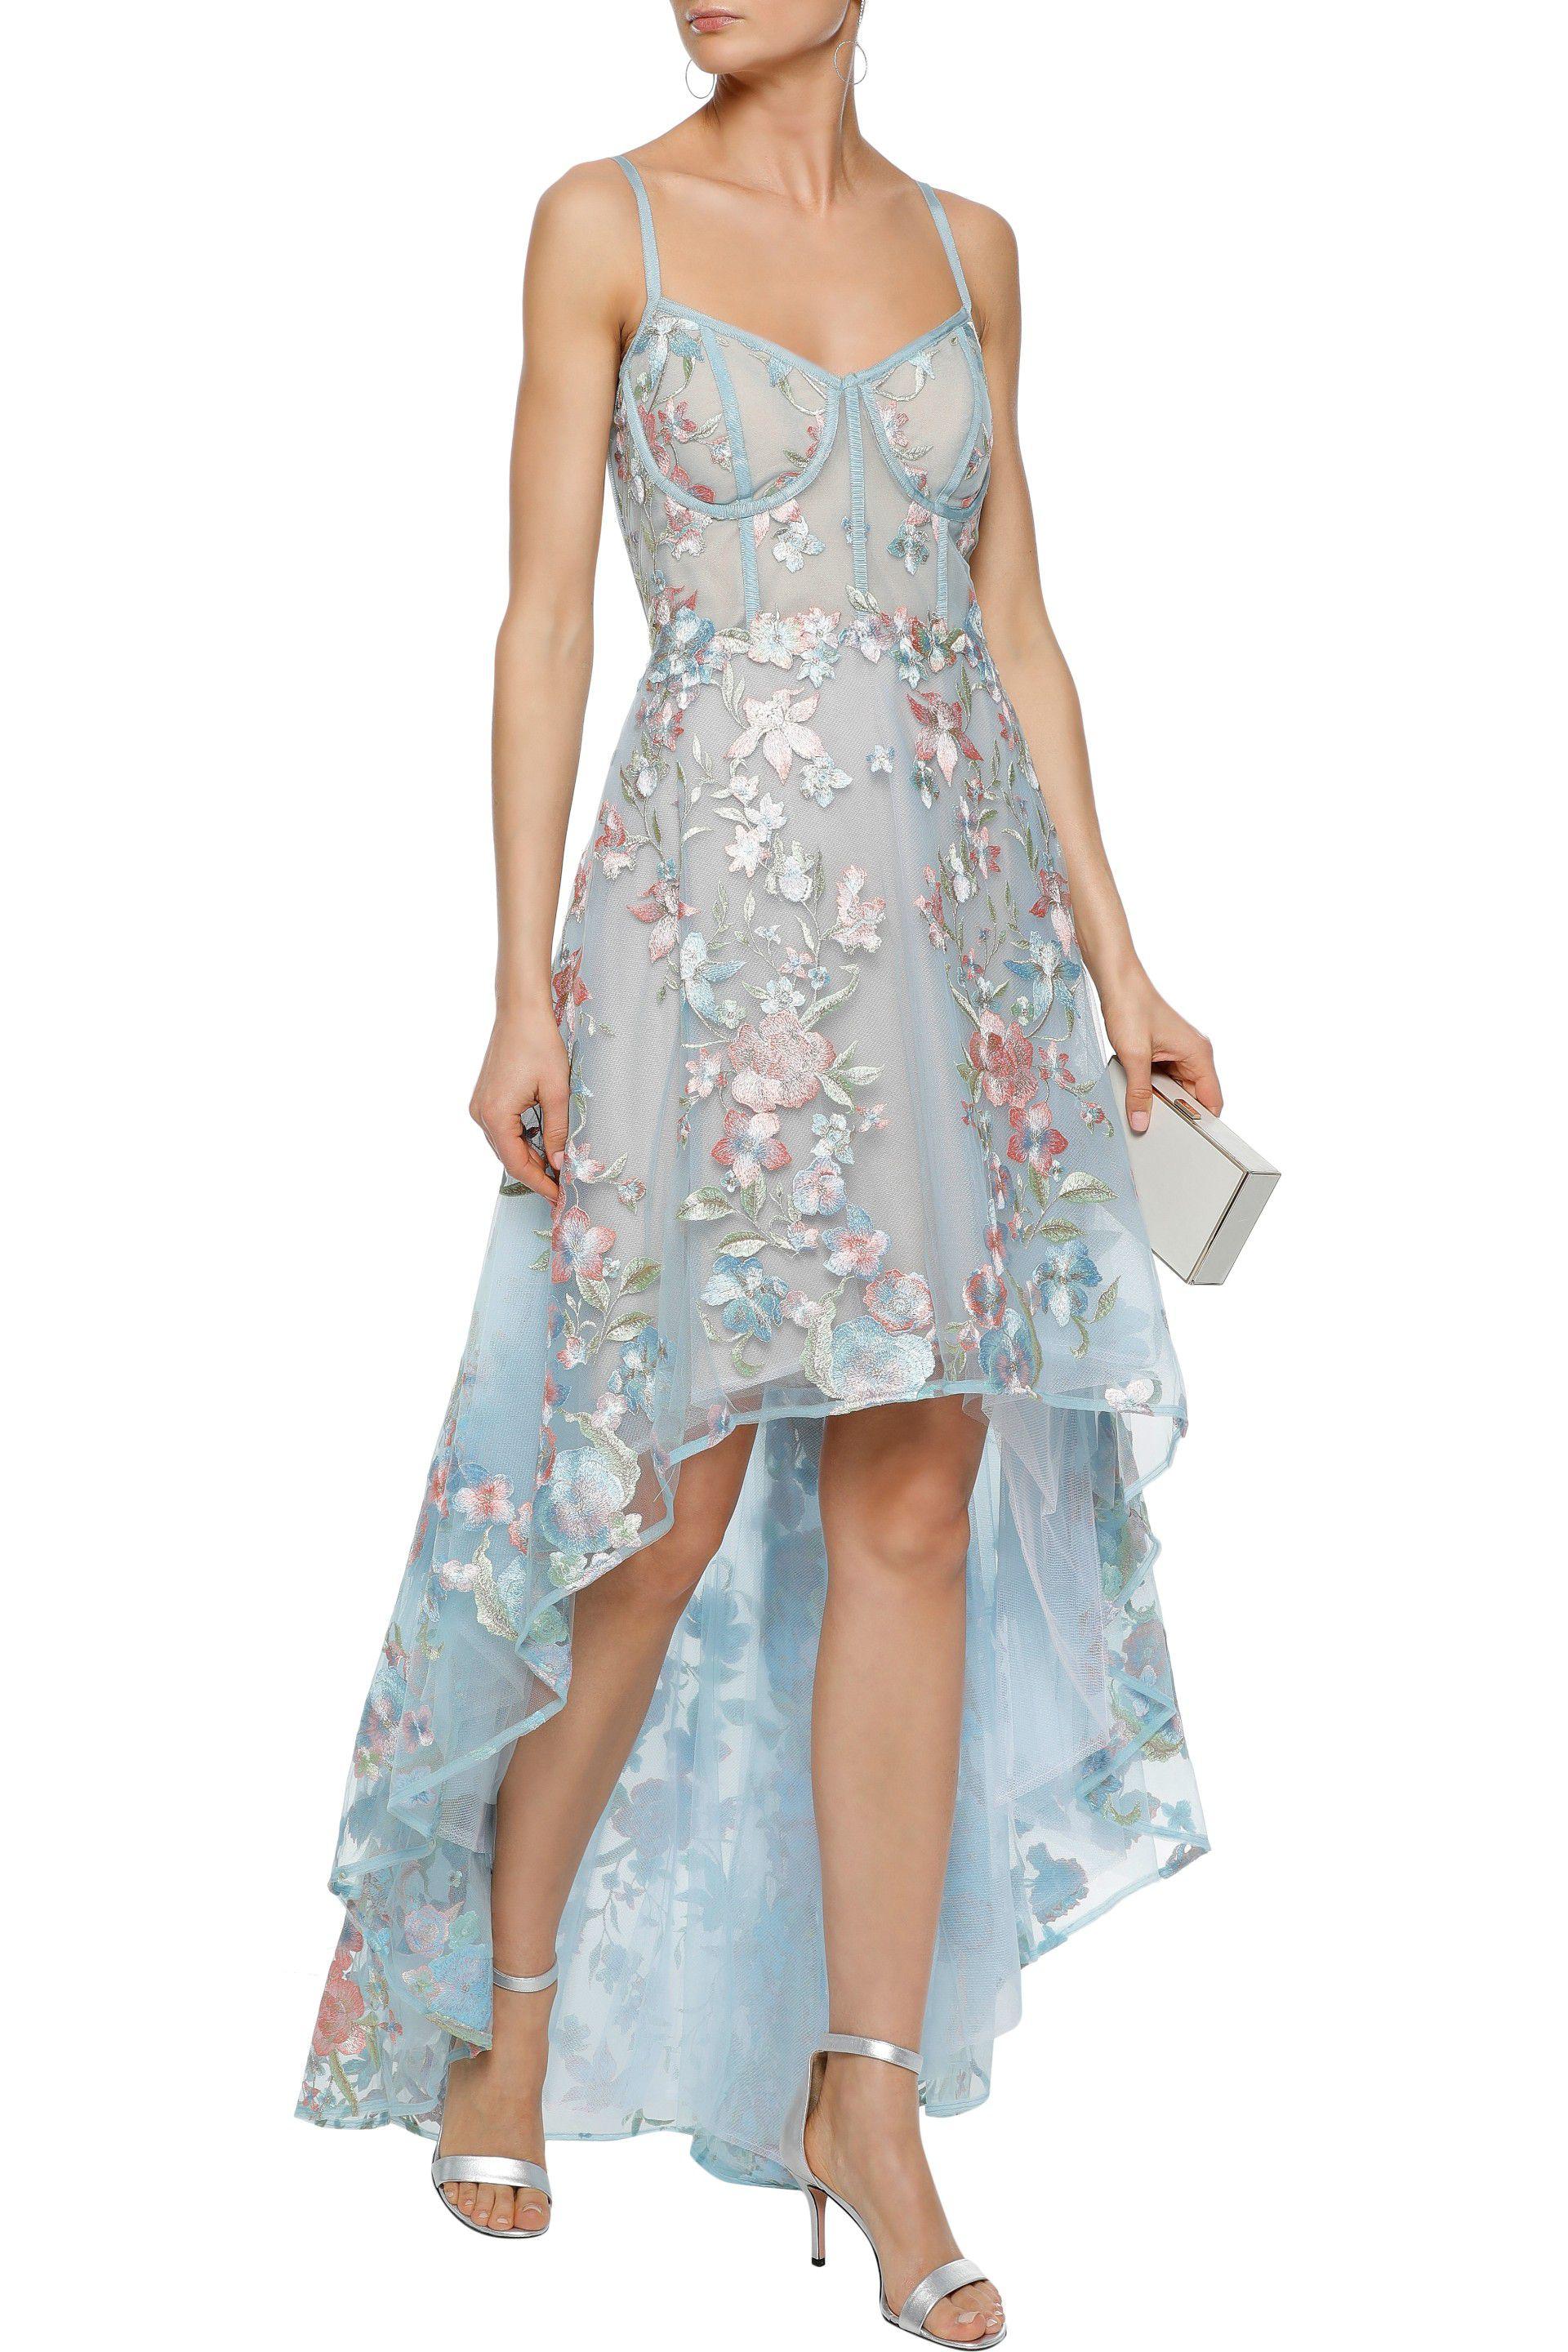 Marchesa notte Asymmetric Embroidered ...